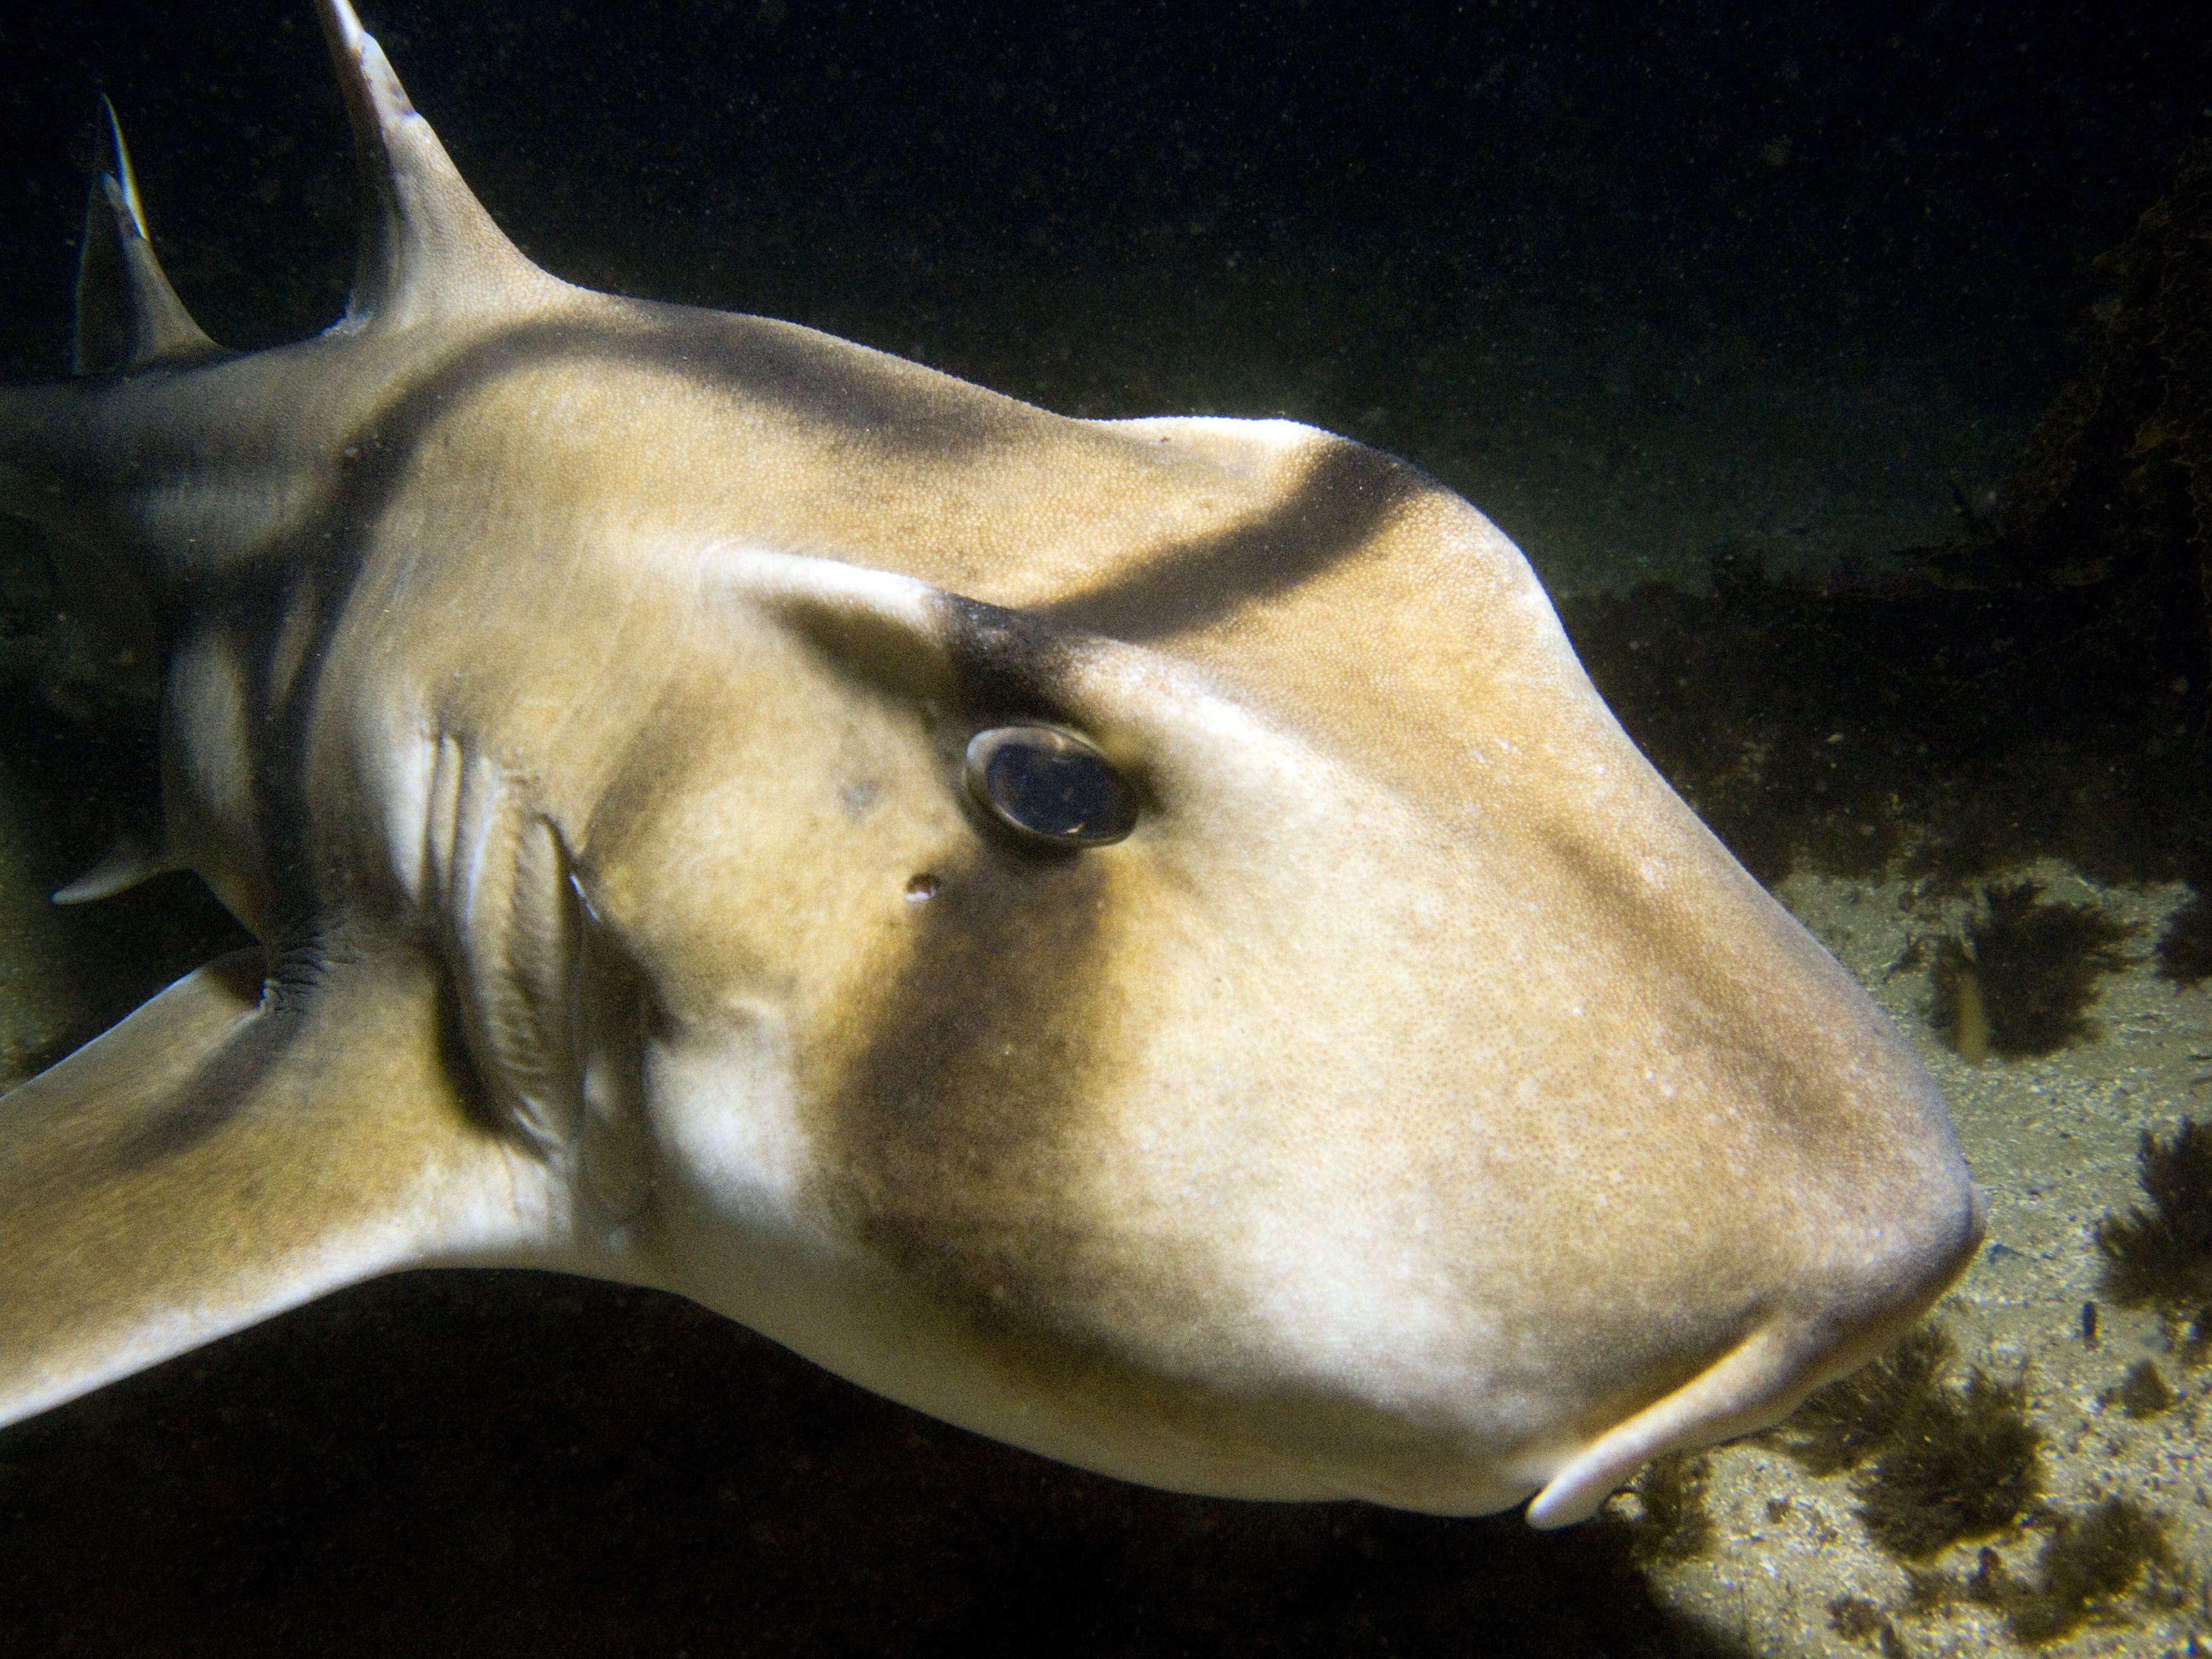 Cape Cortes Dive Site in Catalina Island, California is home to horn shark that is always happy to pose for diver photos